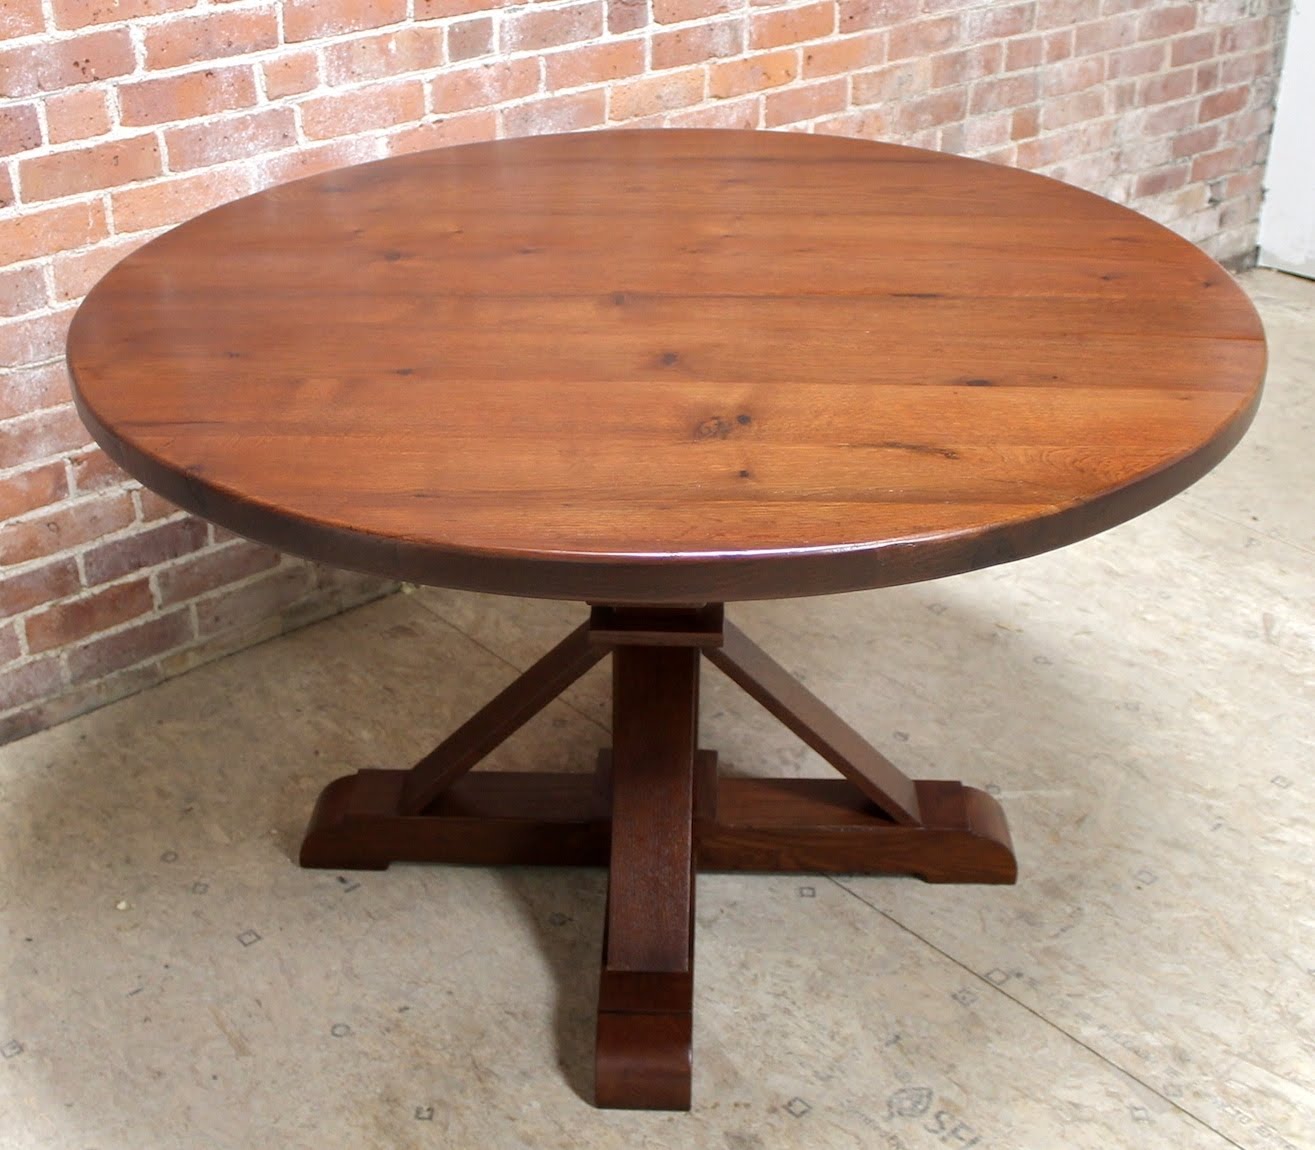 48 Inch Round Dining Table Visualhunt, 48 Inch Round Oak Table Top